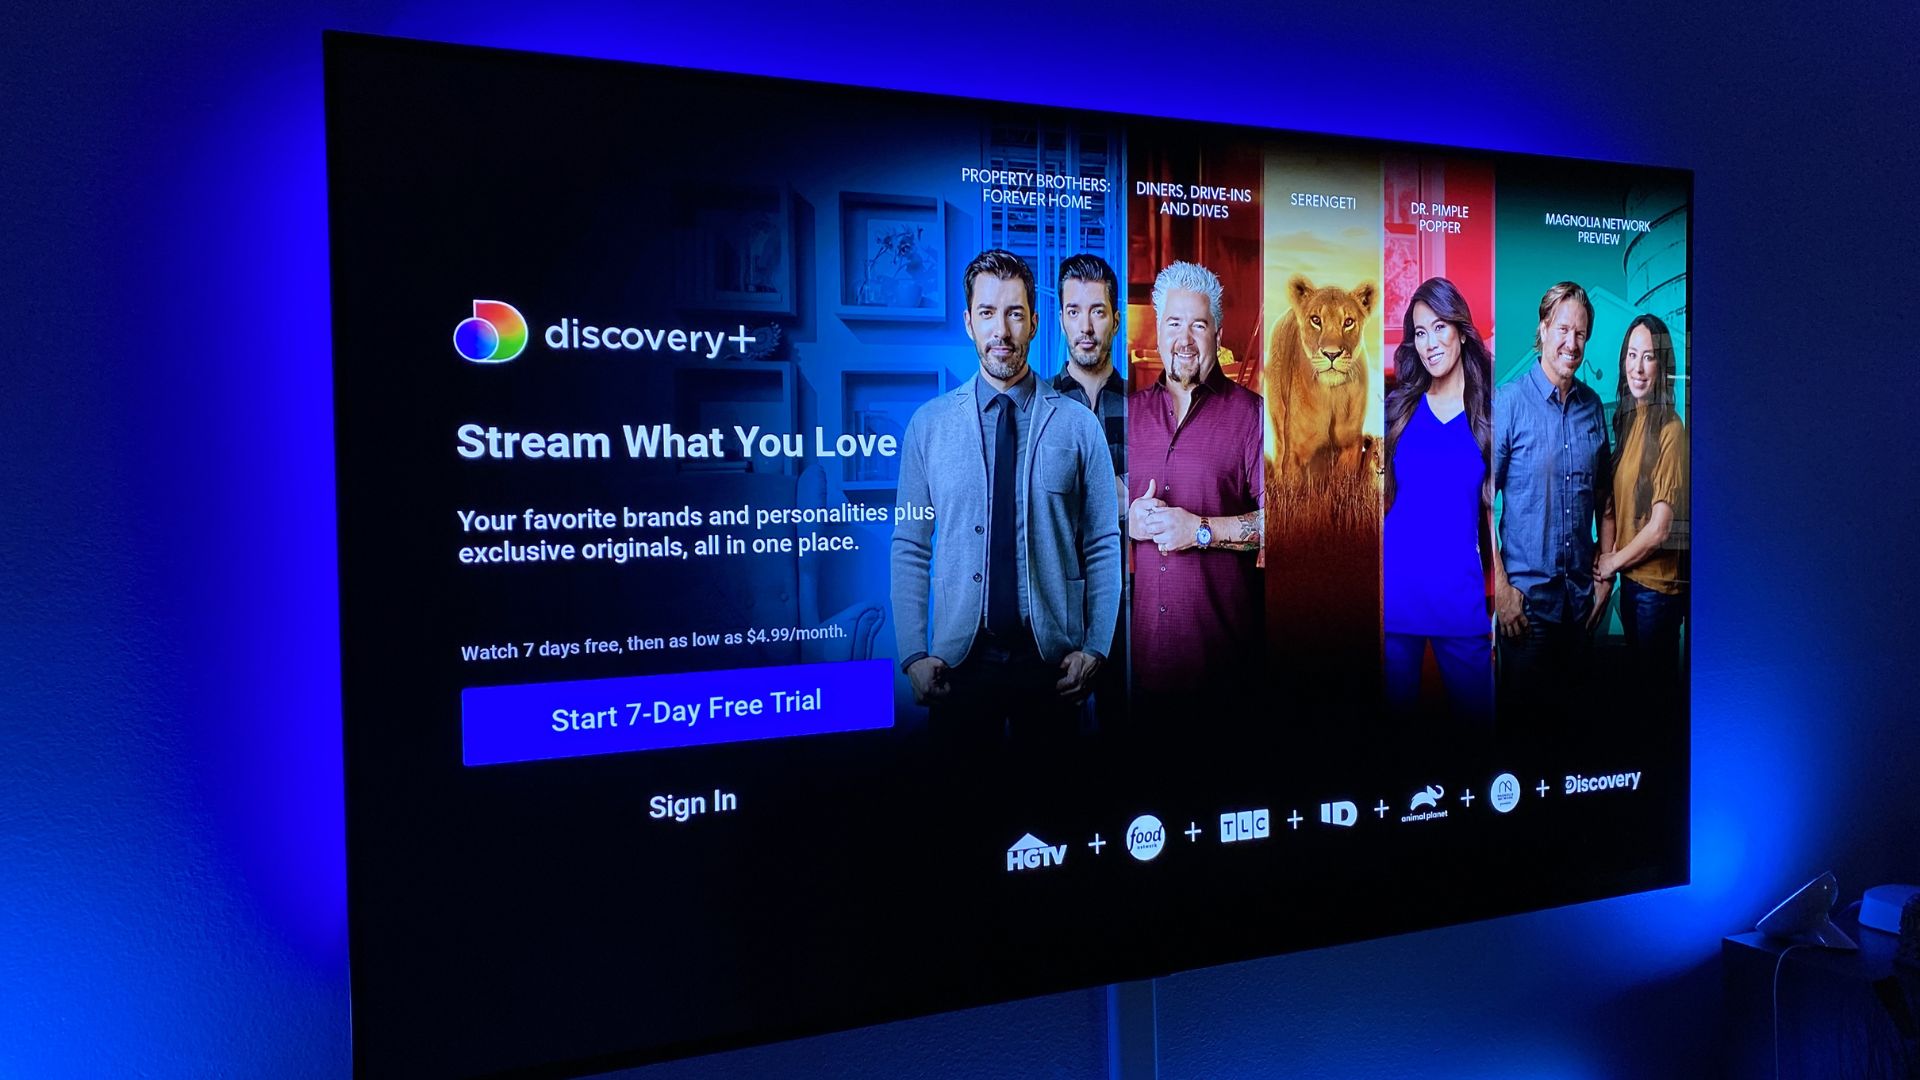 How To Get Discovery Plus On LG Smart TV